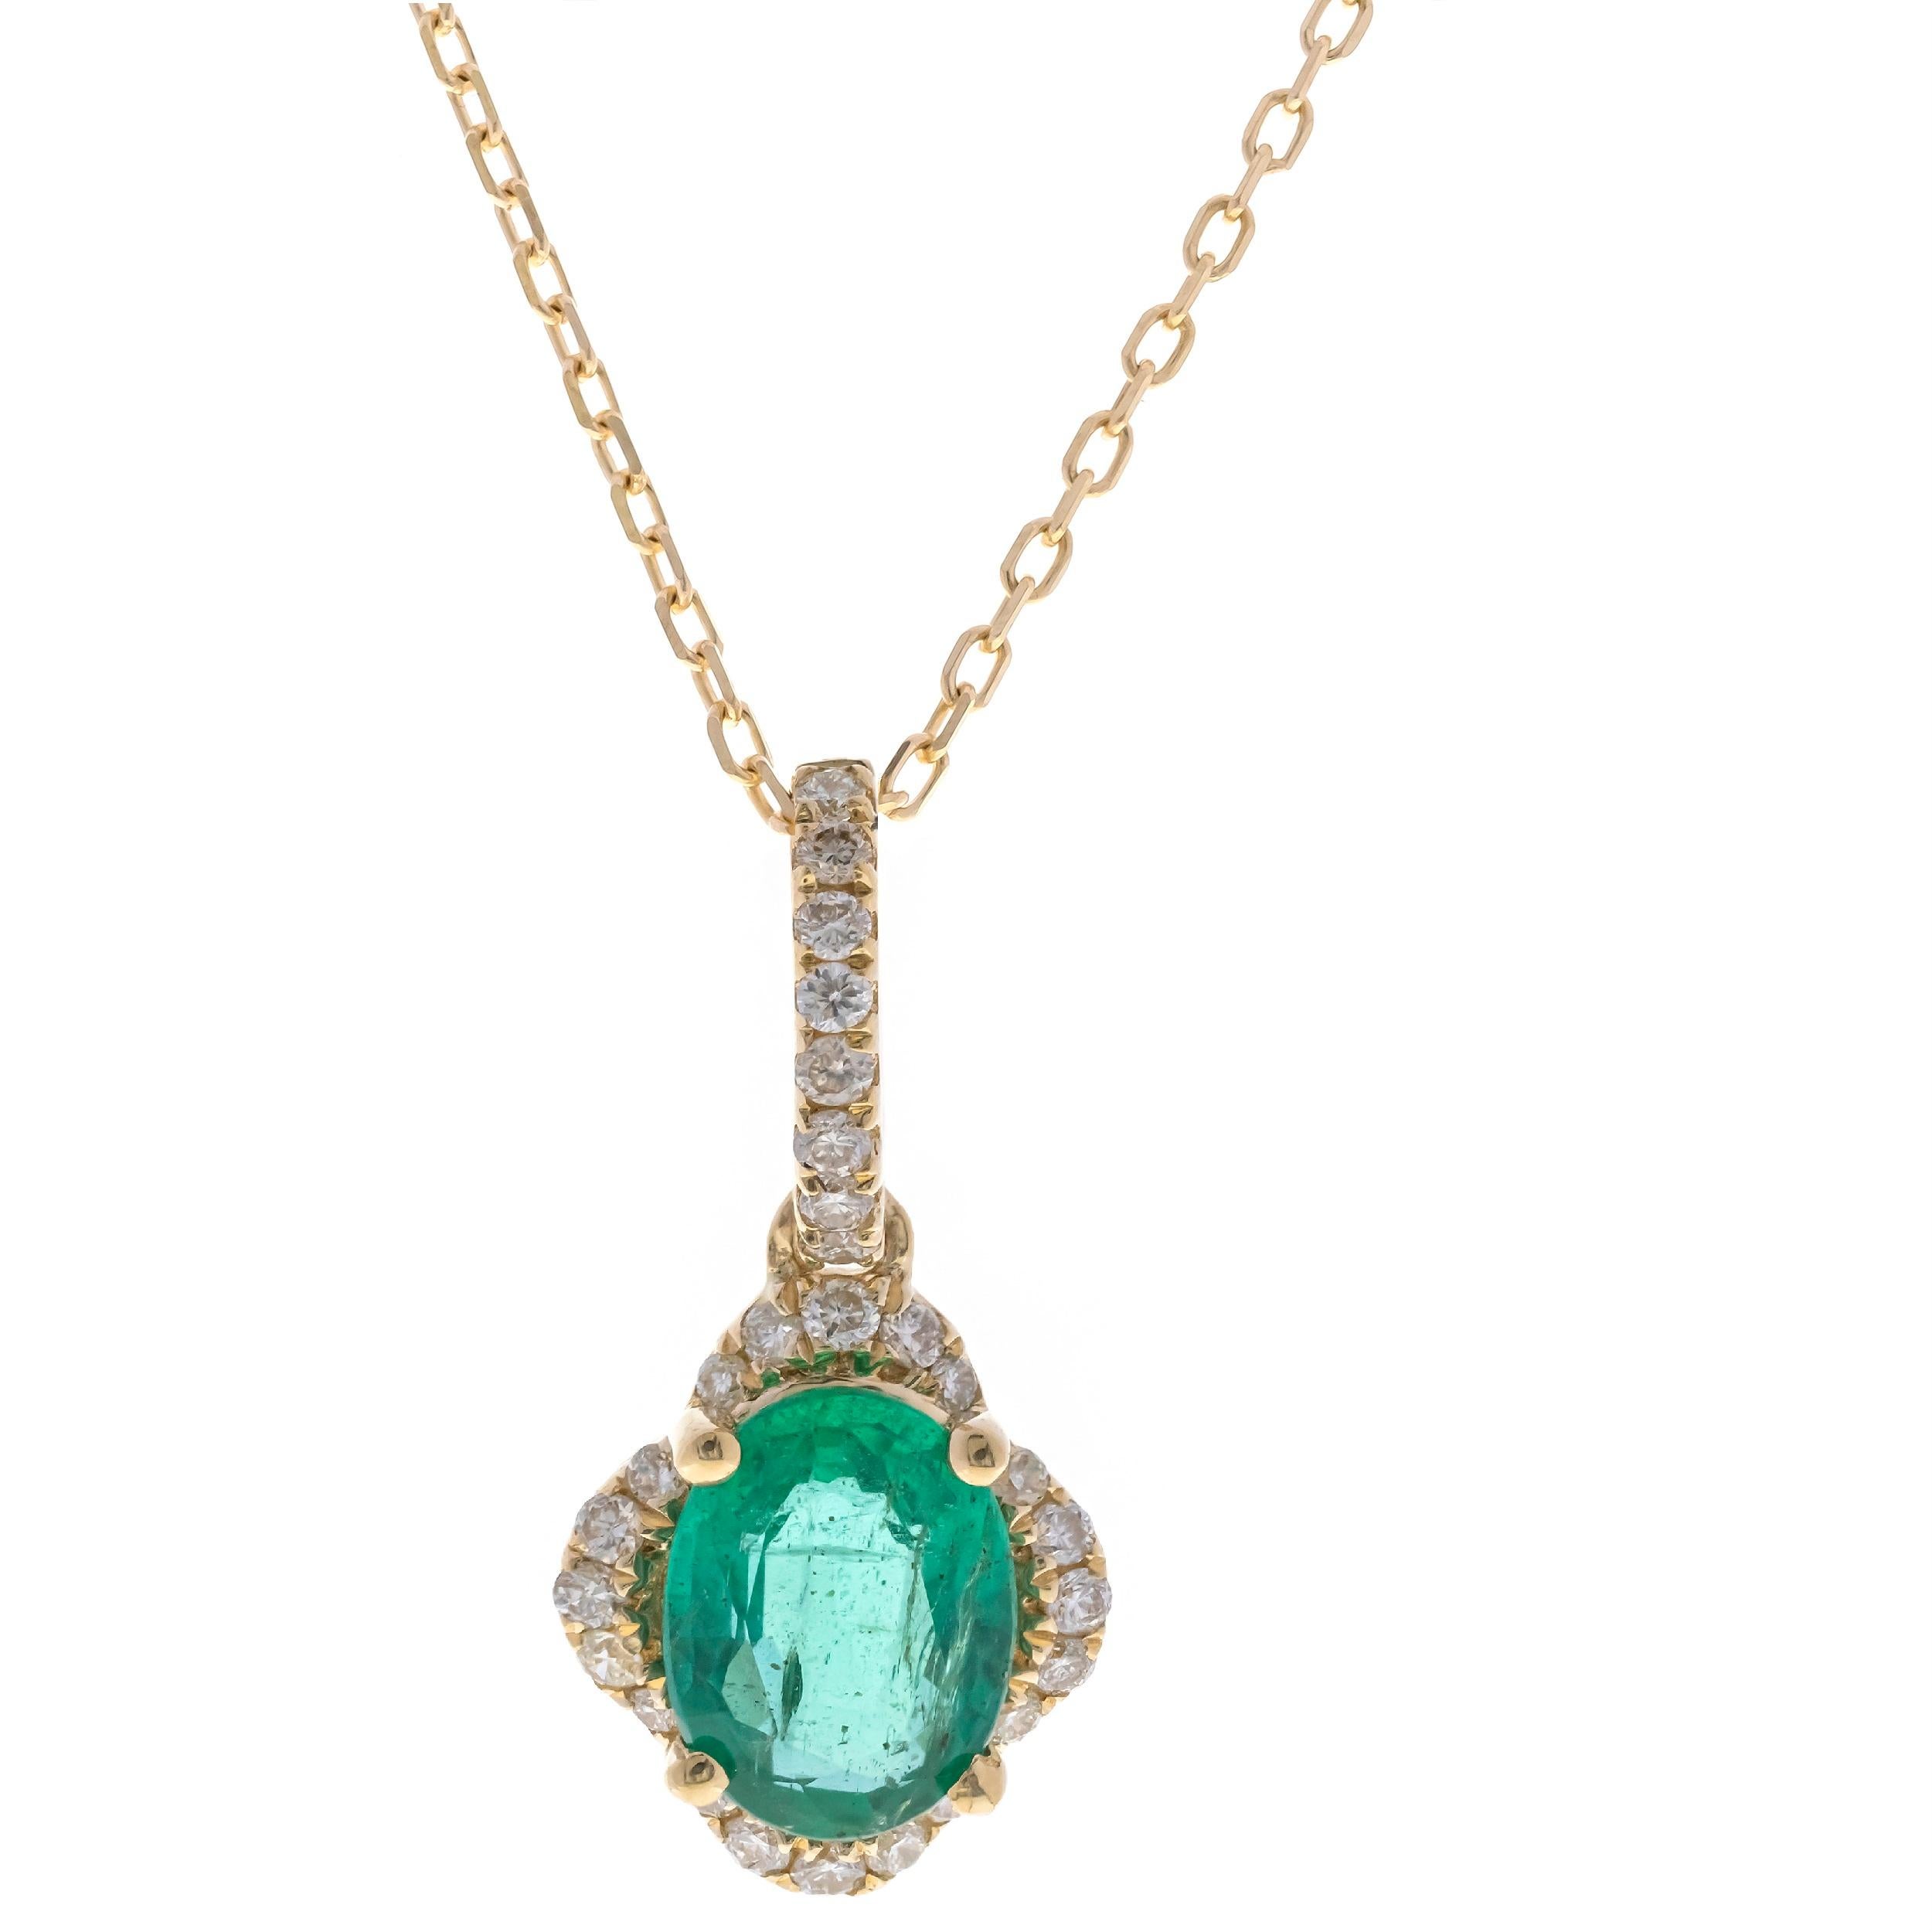 Oval Cut 0.69 Carat Oval-Cut Emerald with Diamond Accents 14K Yellow Gold Pendant